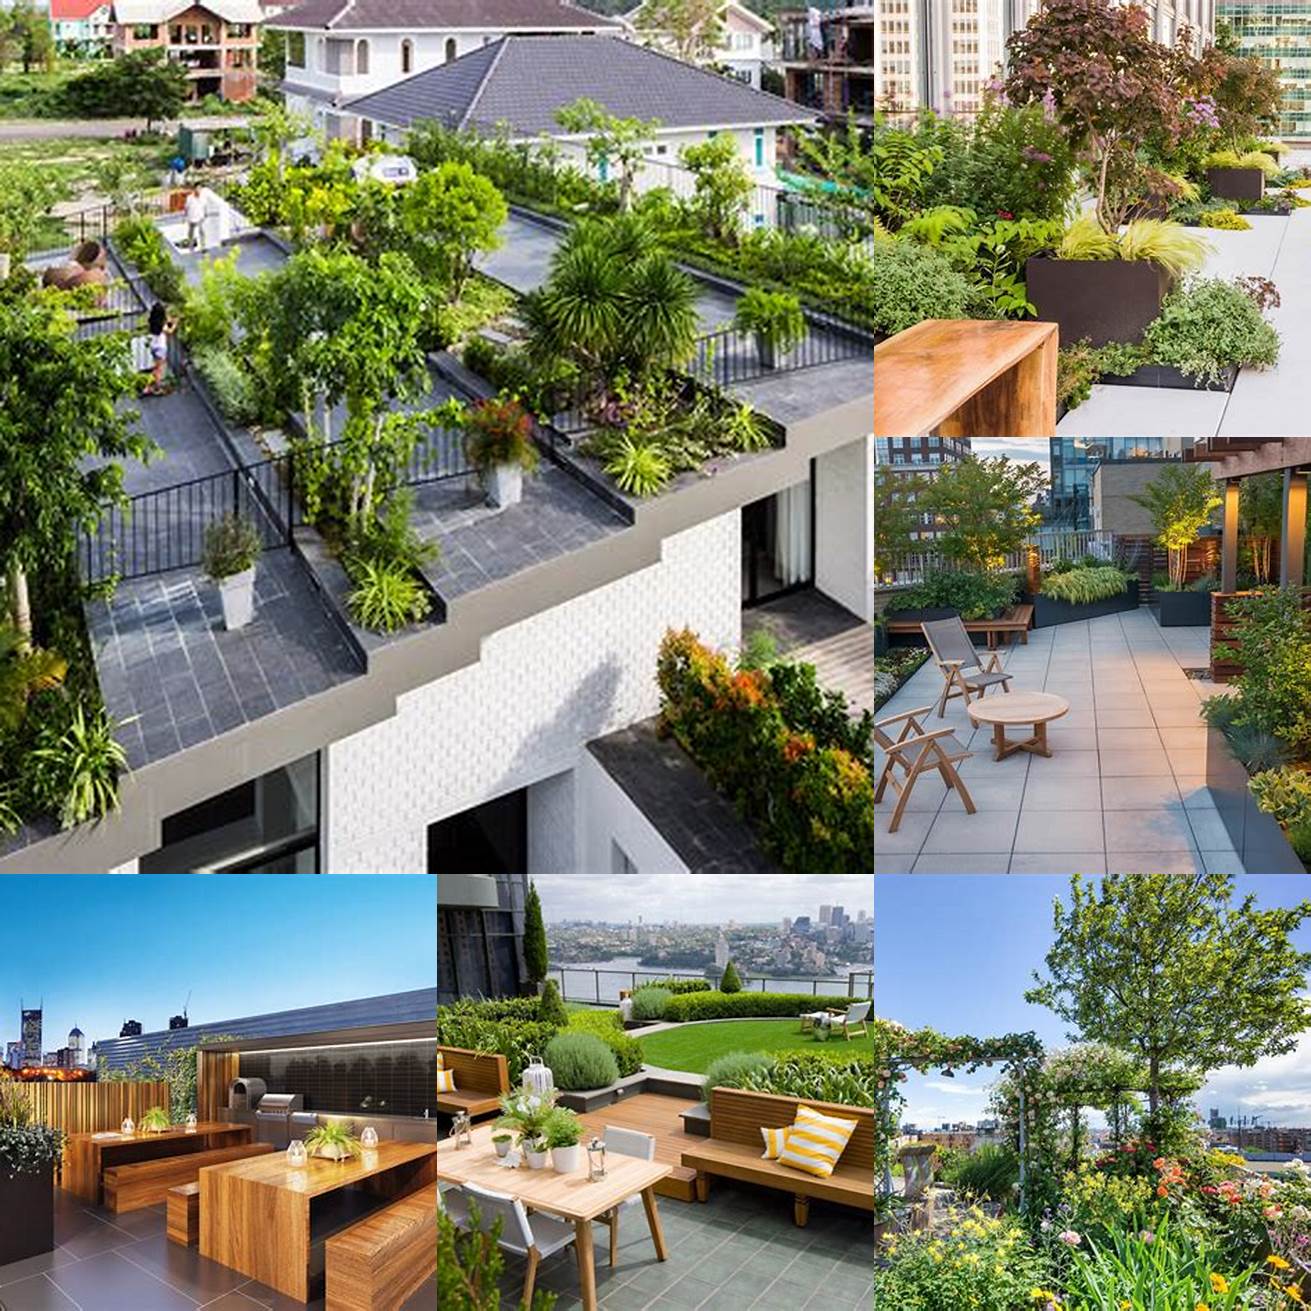 4 Increased property value Rooftop gardens can add value to your property making it more attractive to potential buyers